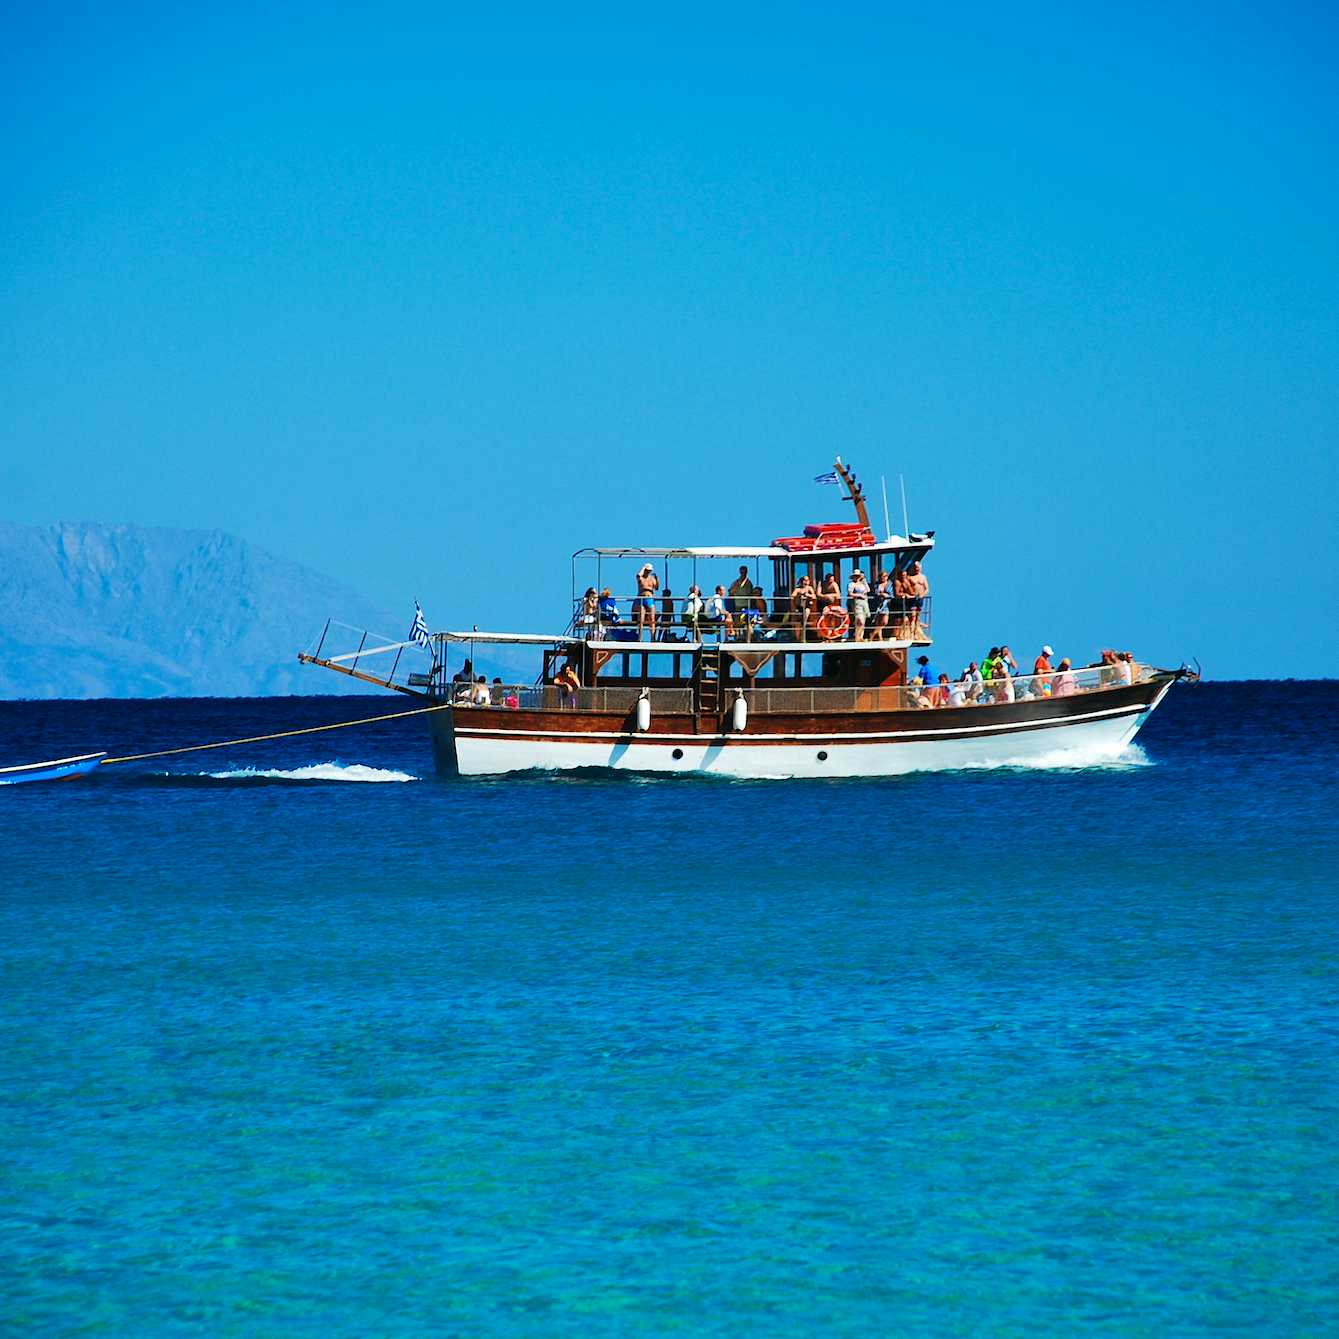 Photo Caption: Take a day trip and enjoy a family cruise along the beautiful bay